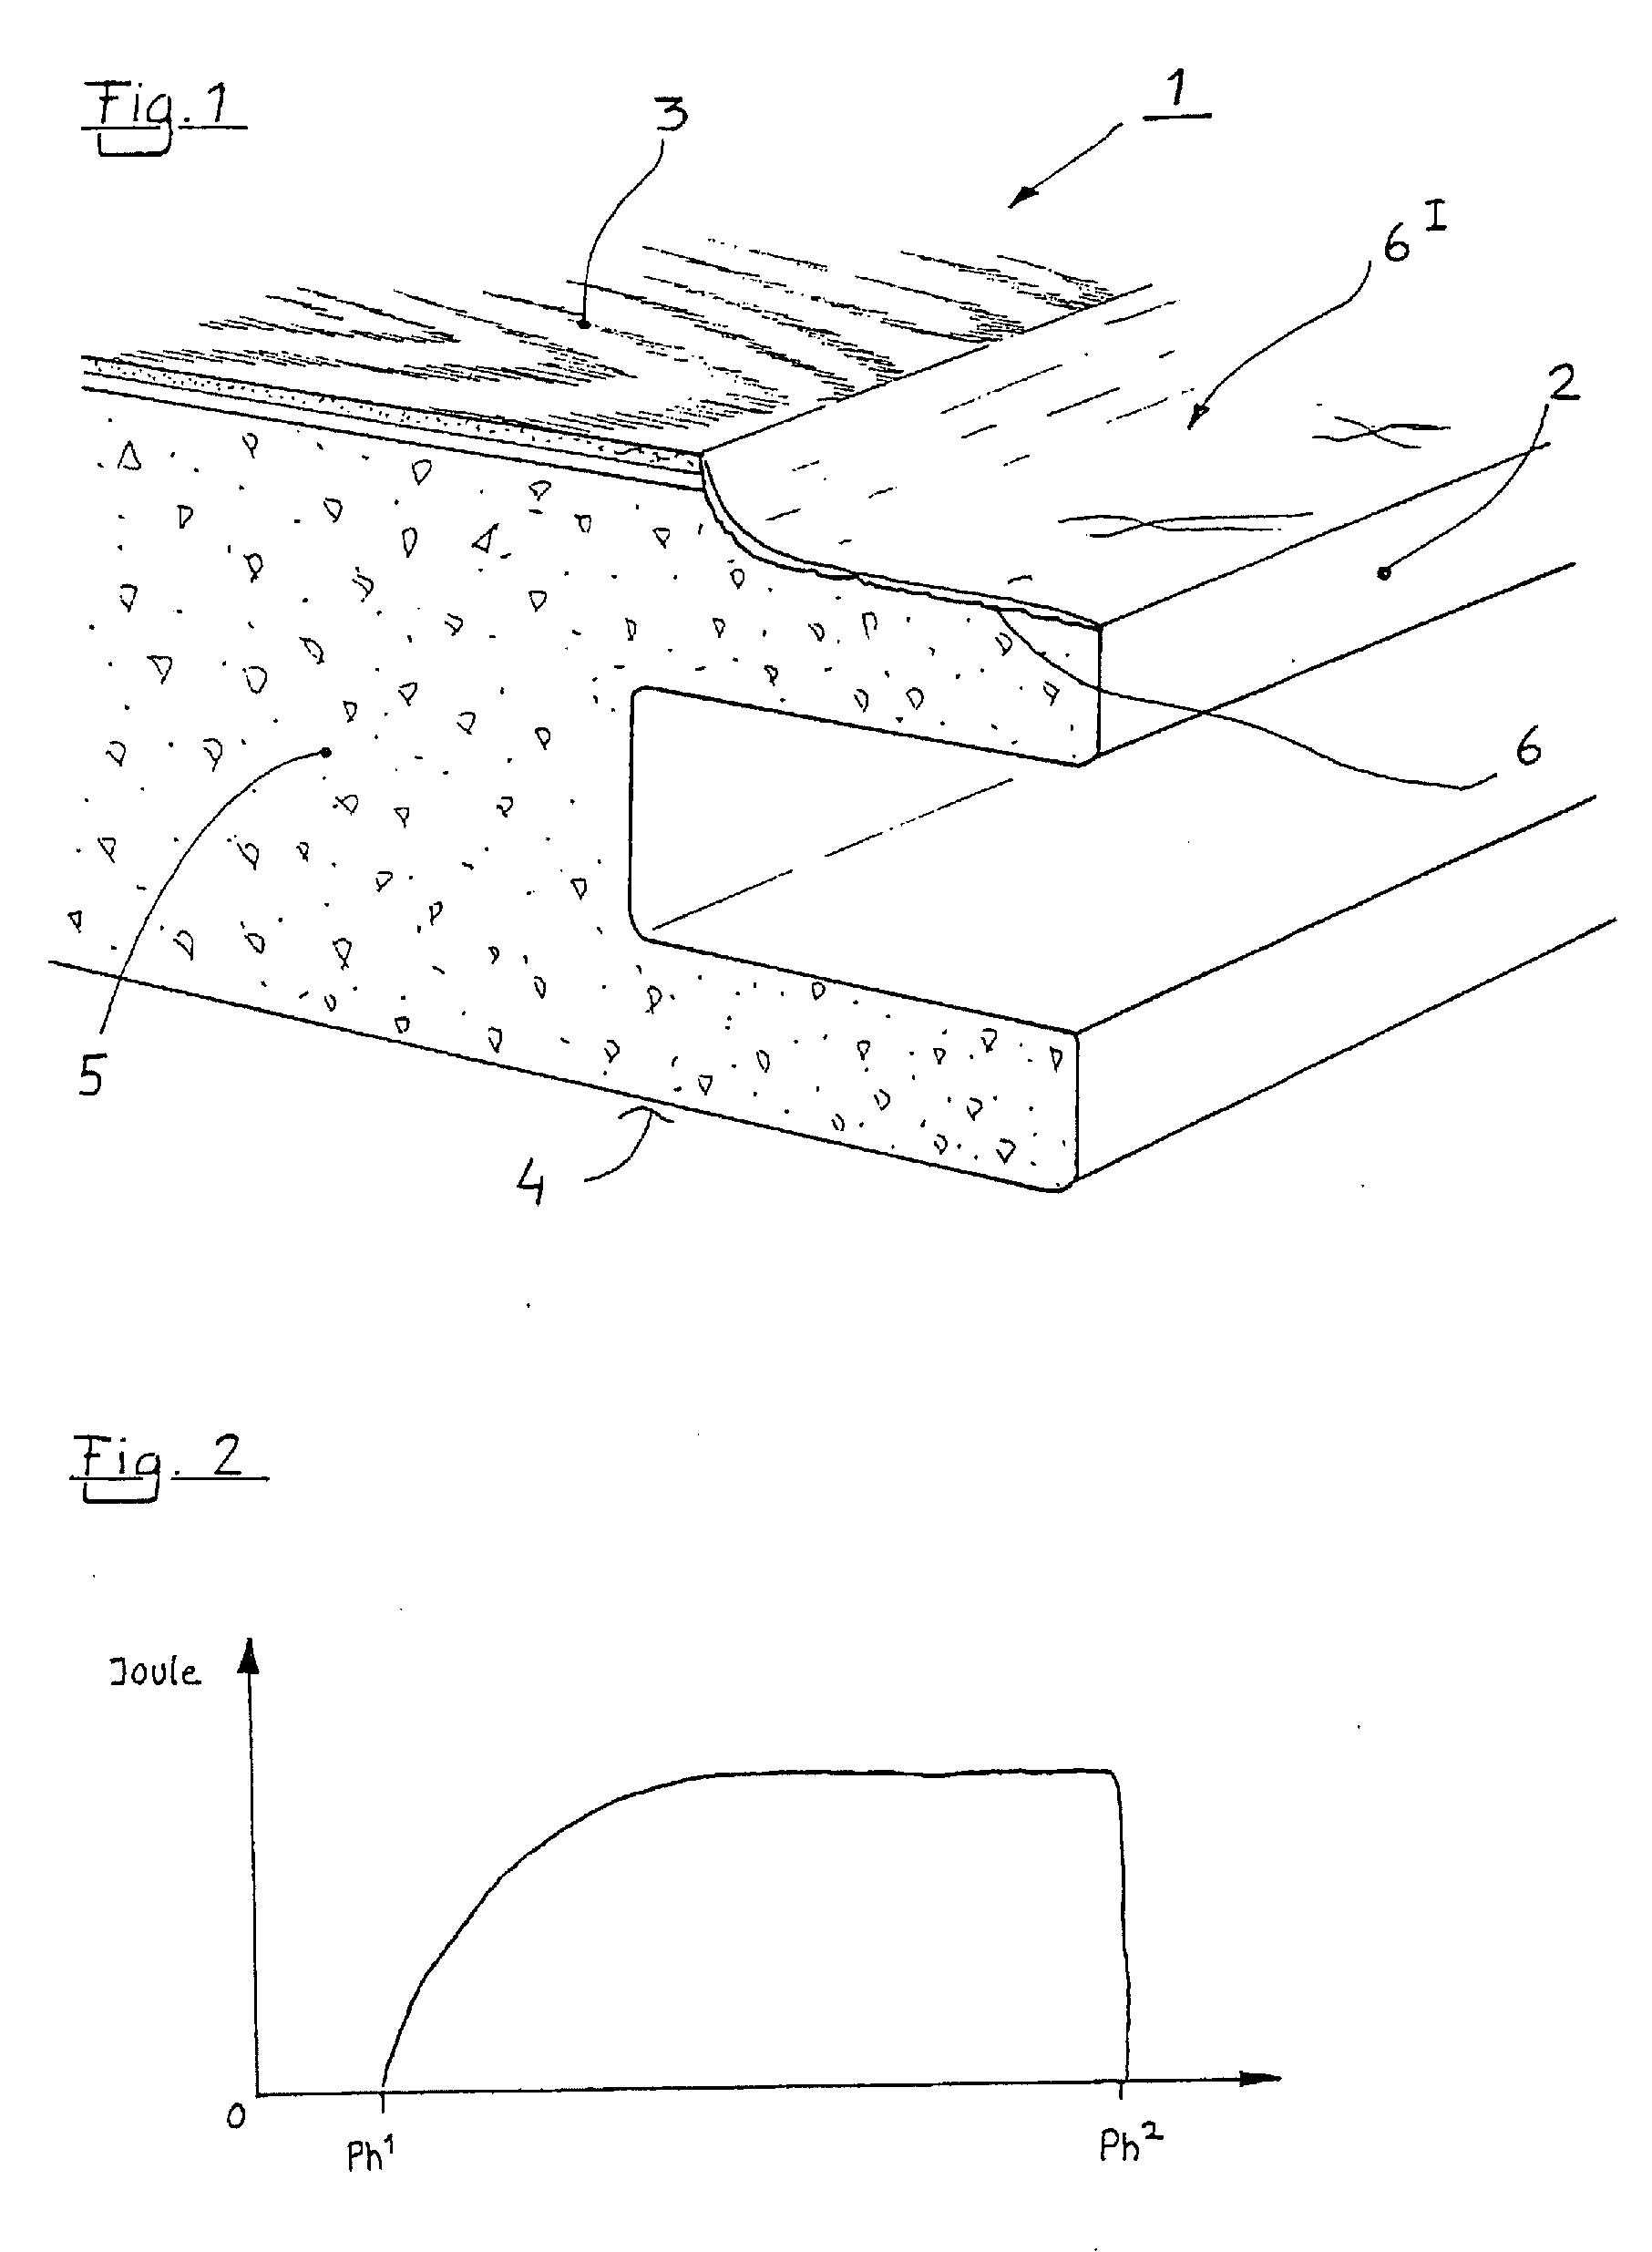 Decorative laminate board and related methods